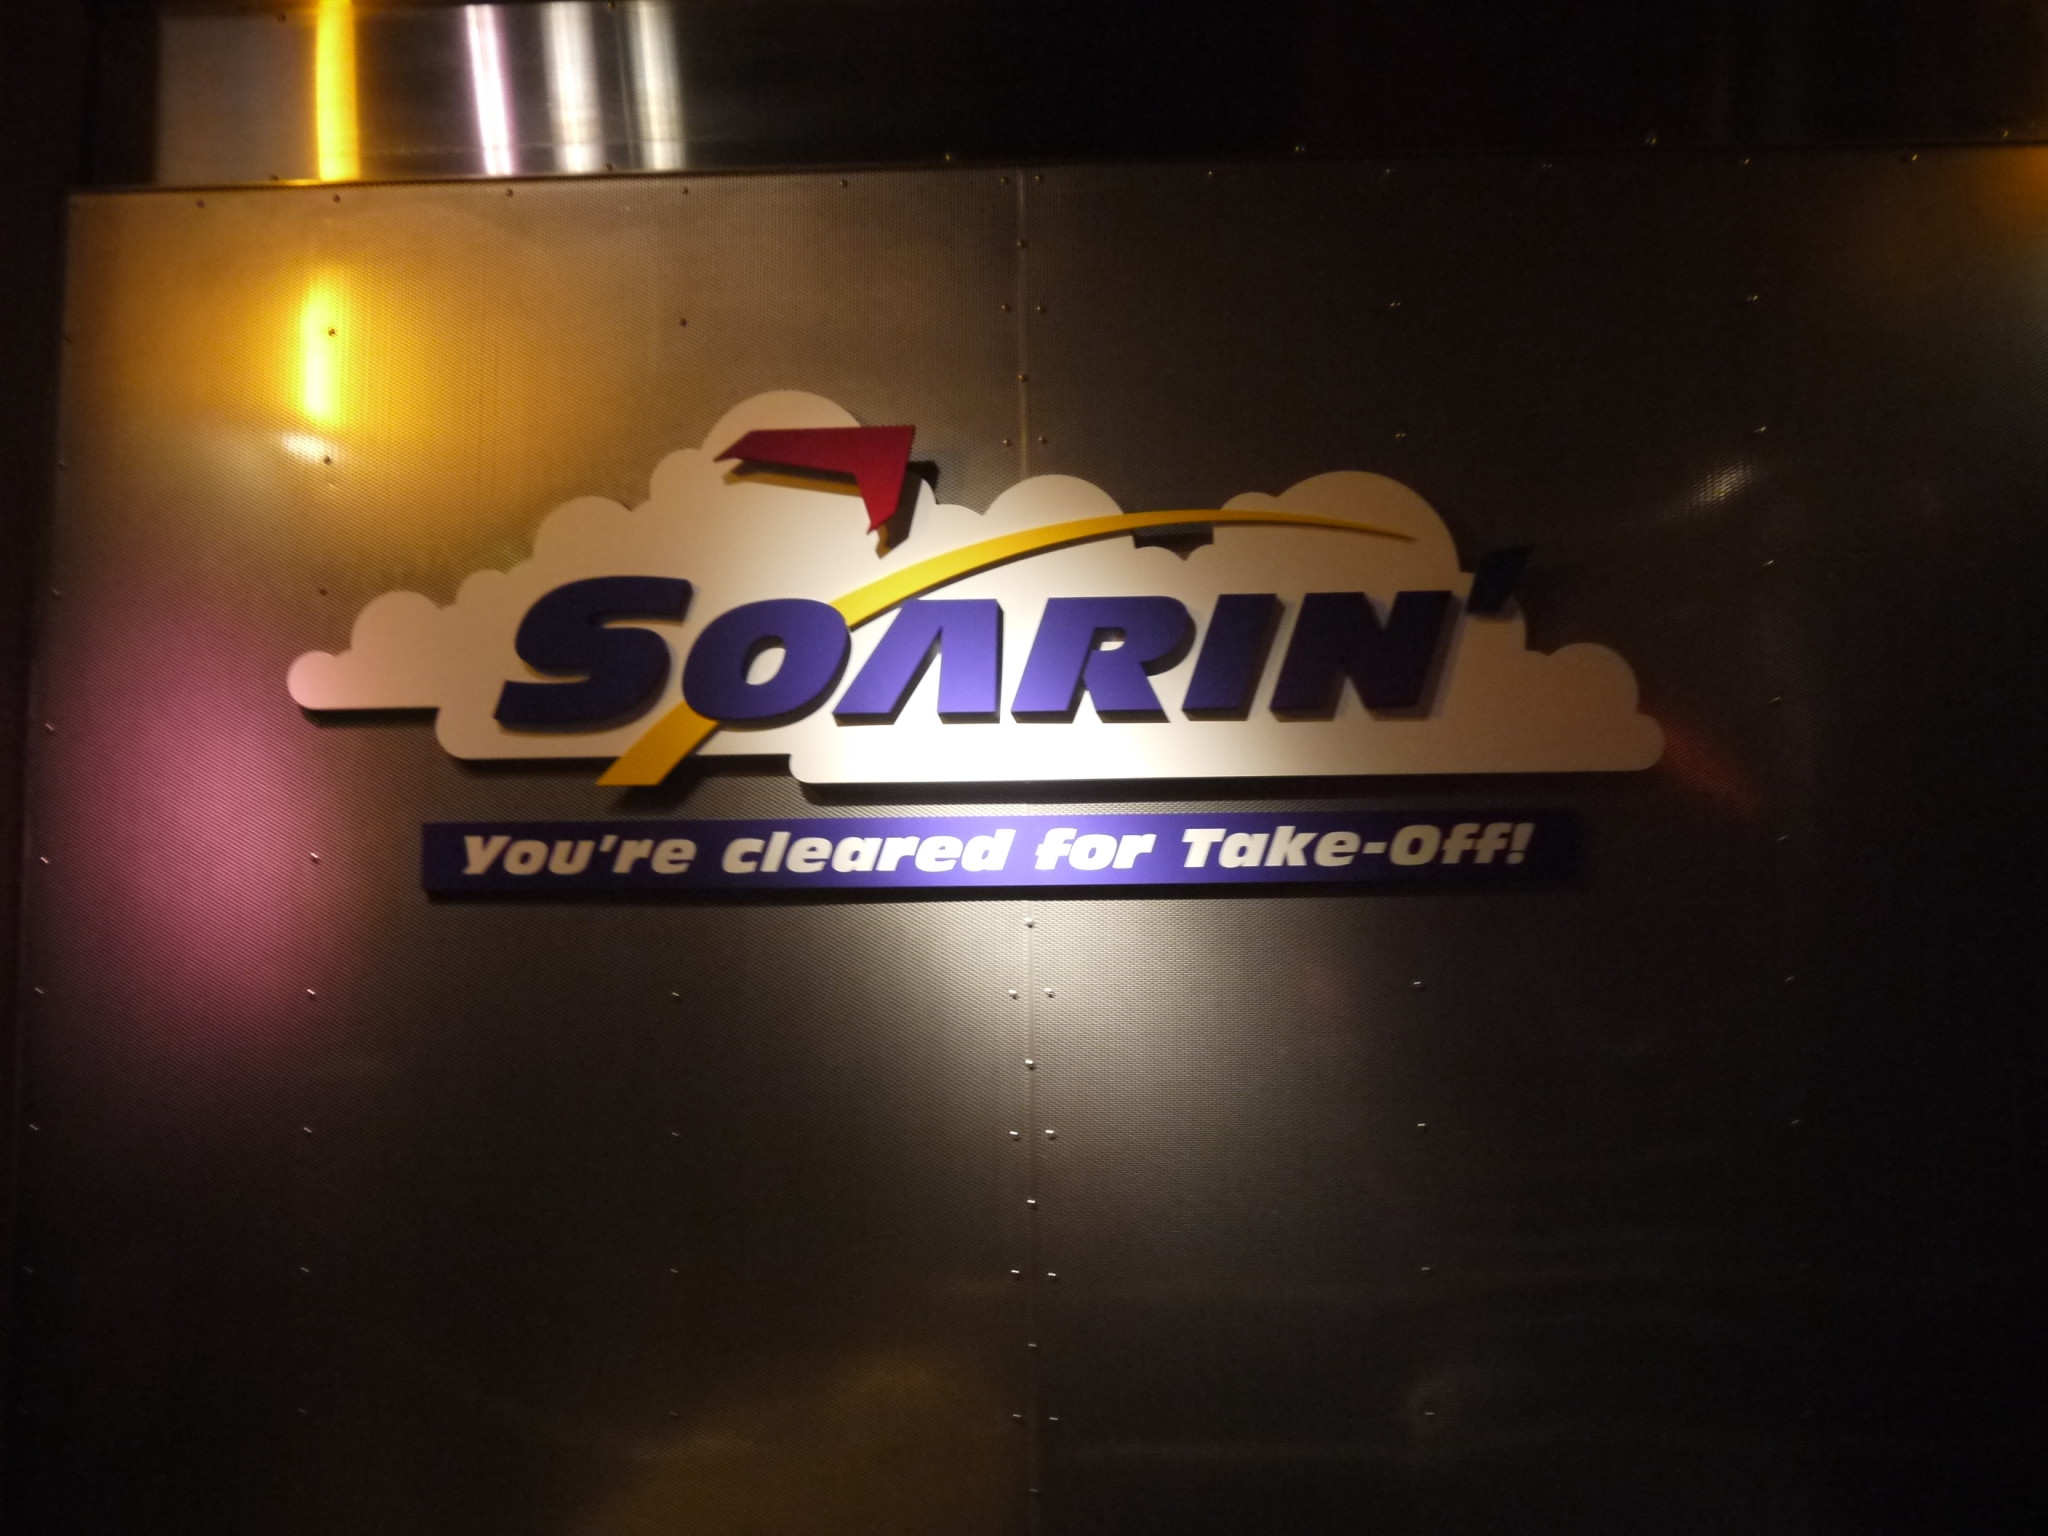 Soarin’ at Walt Disney World may be getting an update